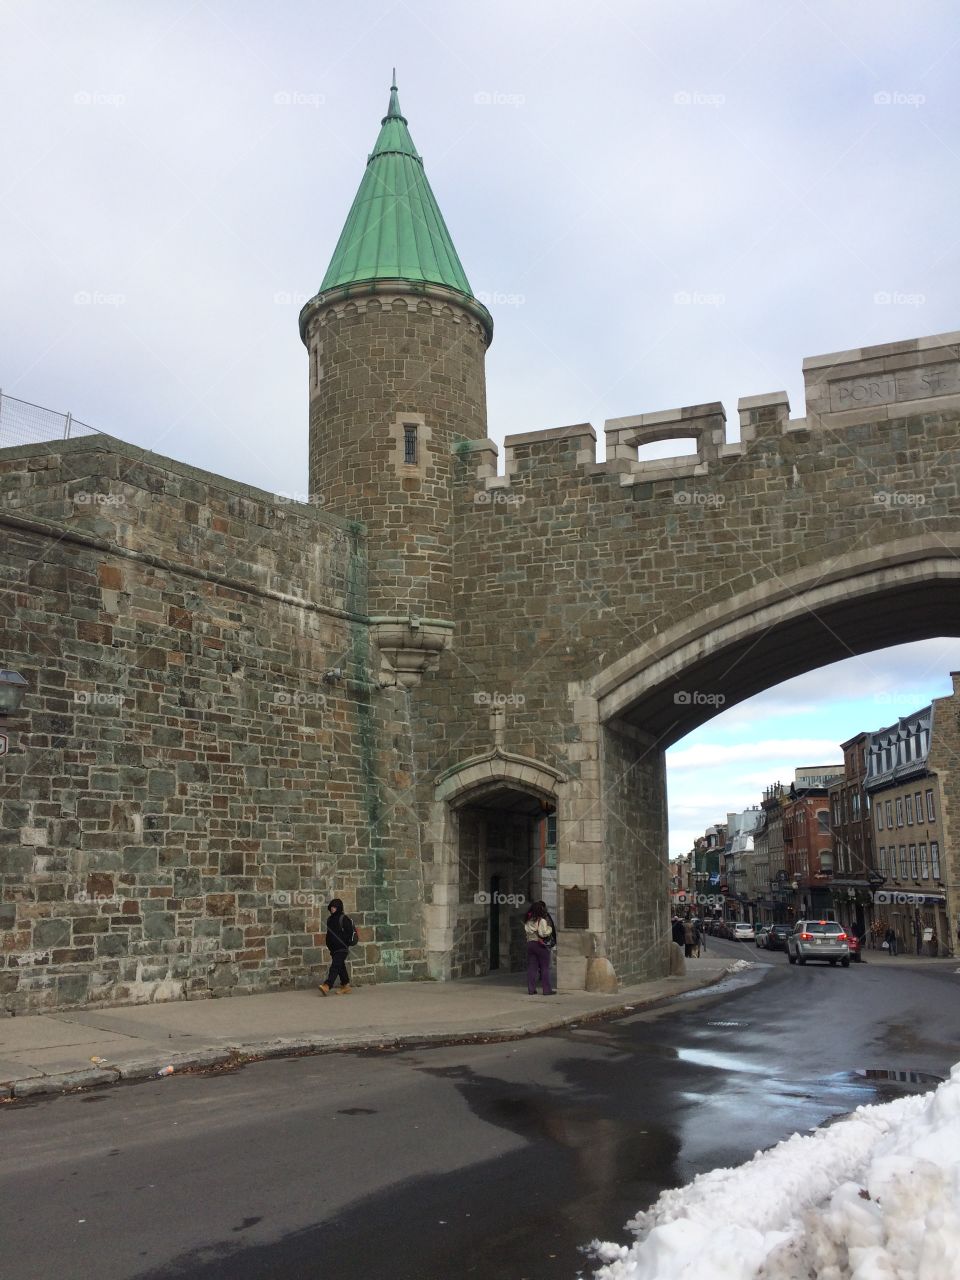 The gate entrance to Old Town Quebec 